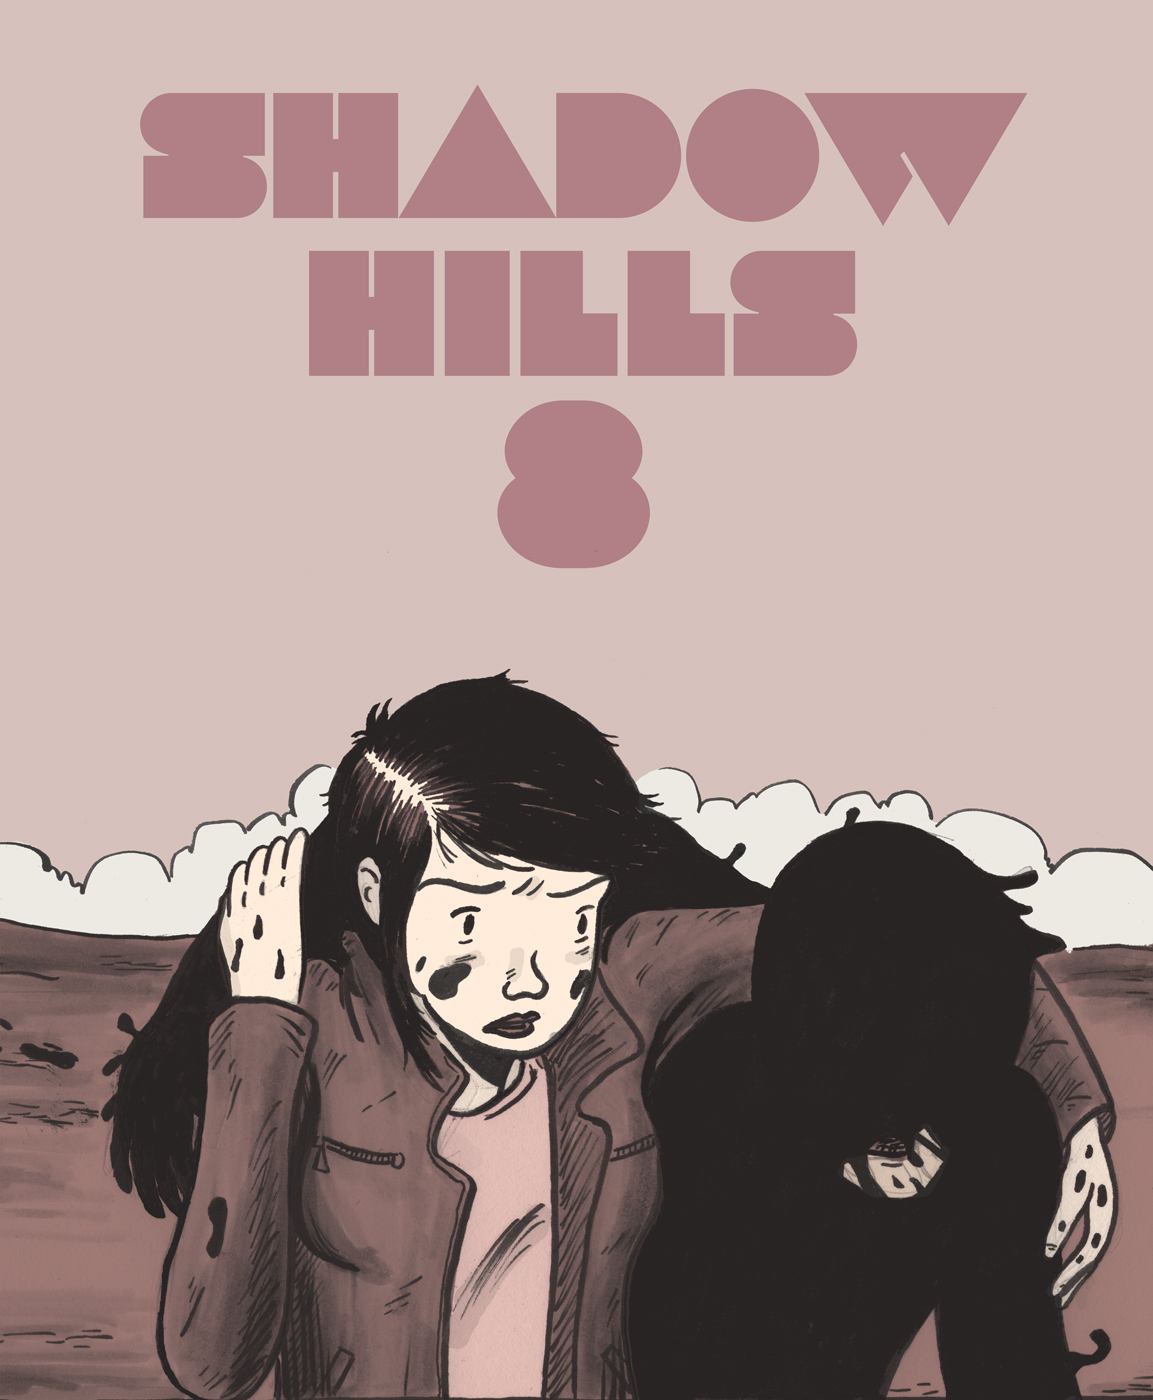 Shadow Hills 8 cover